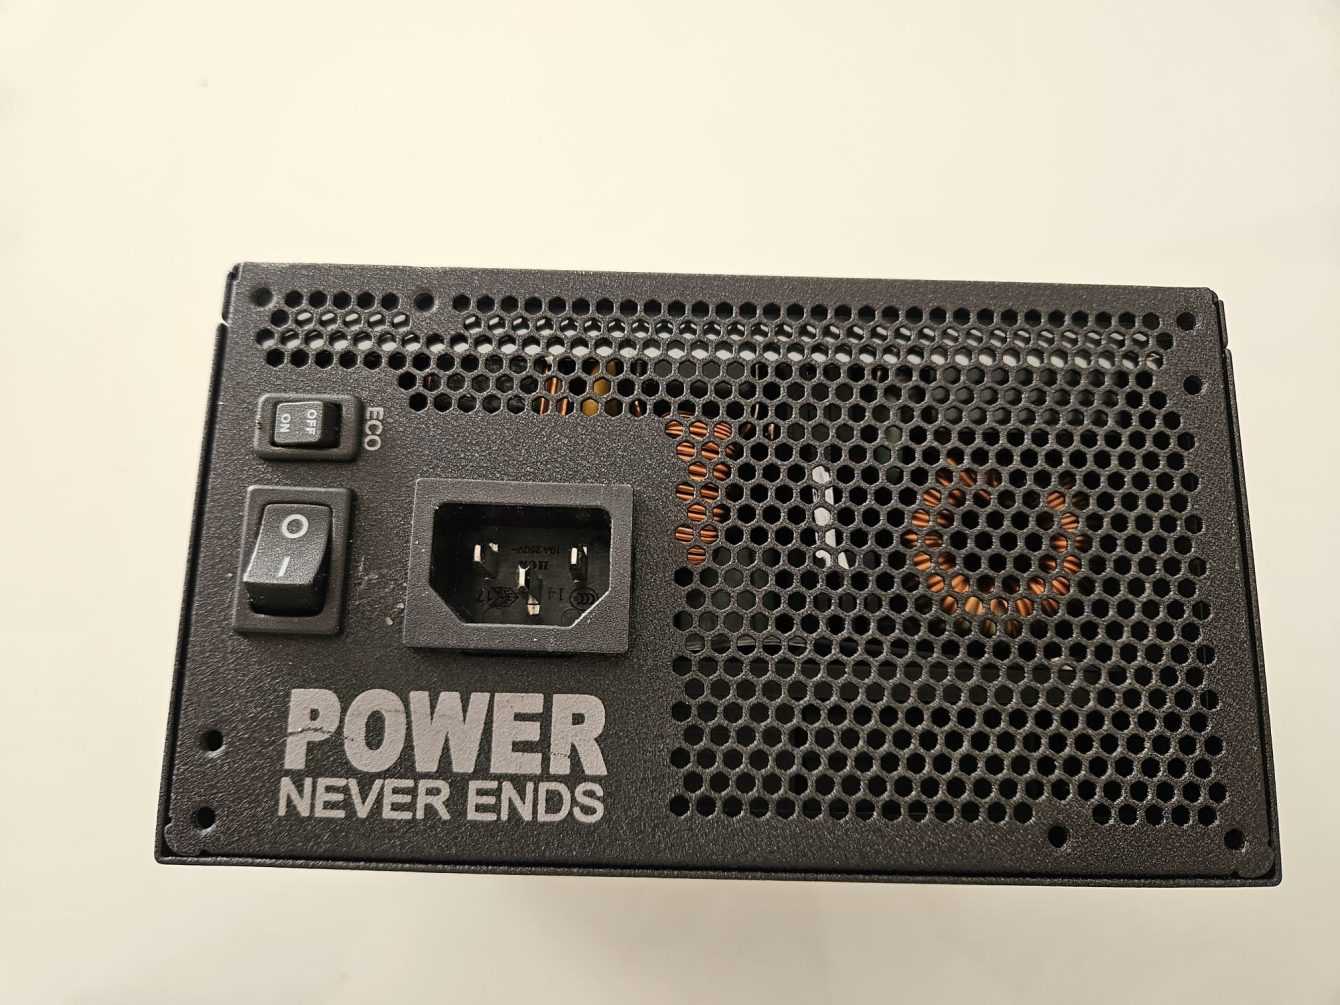 FSP Hydro PTM X review: smaller but still powerful